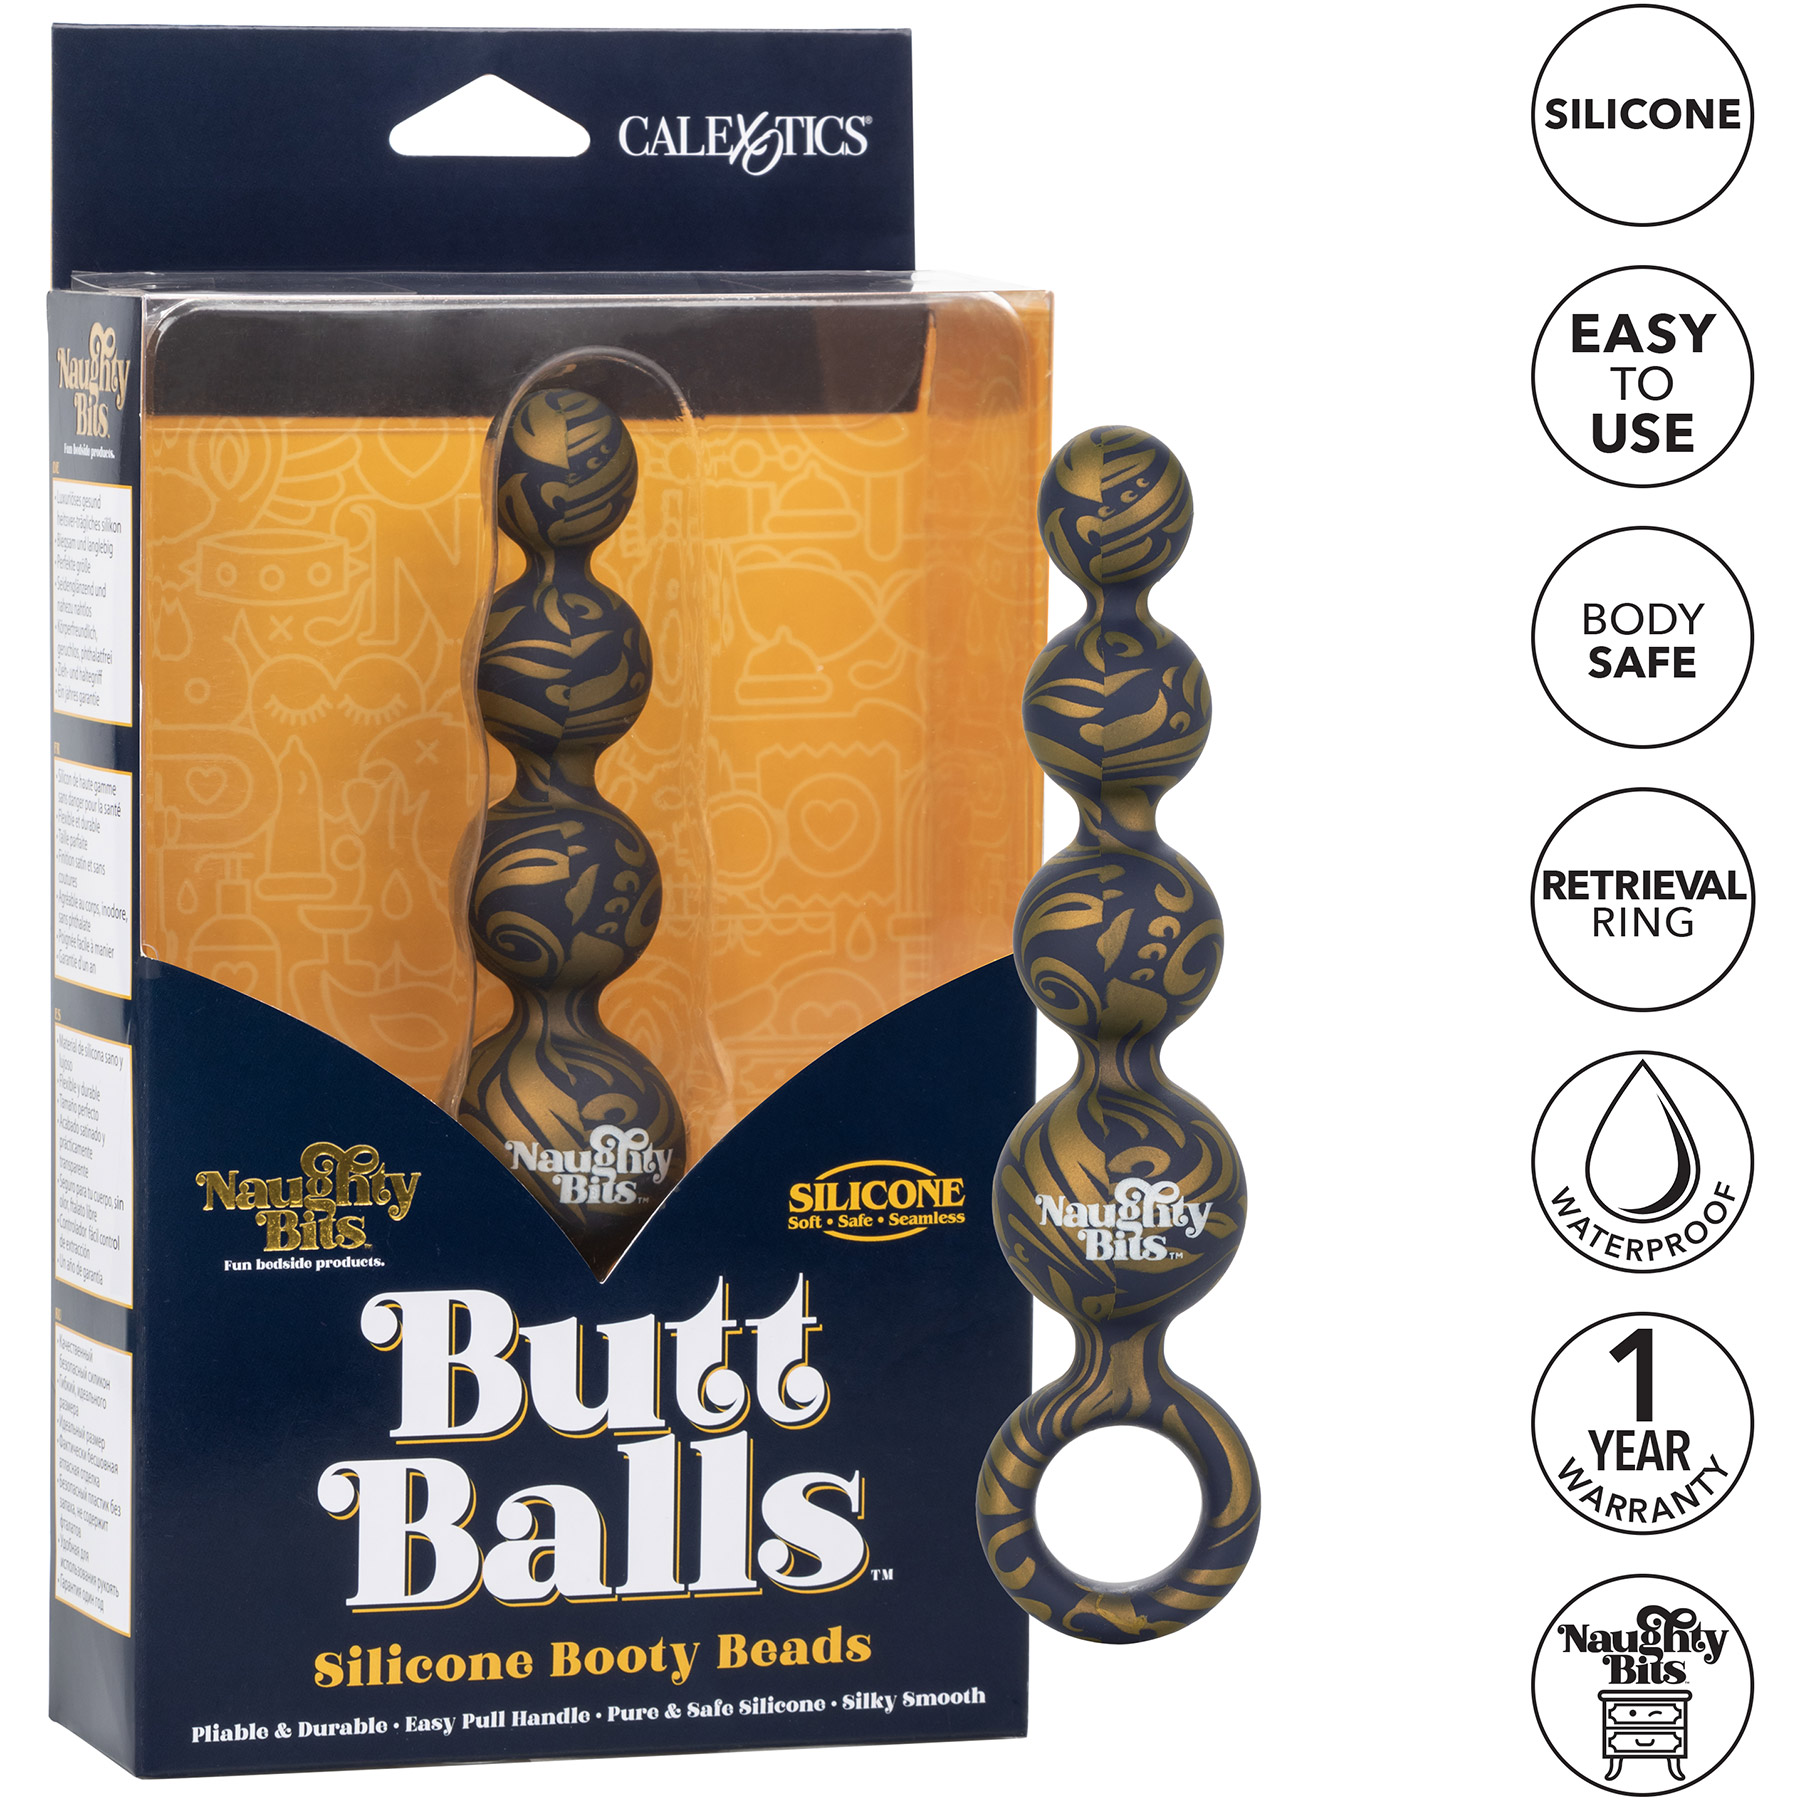 Naughty Bits Butt Balls Silicone Booty Beads - Features